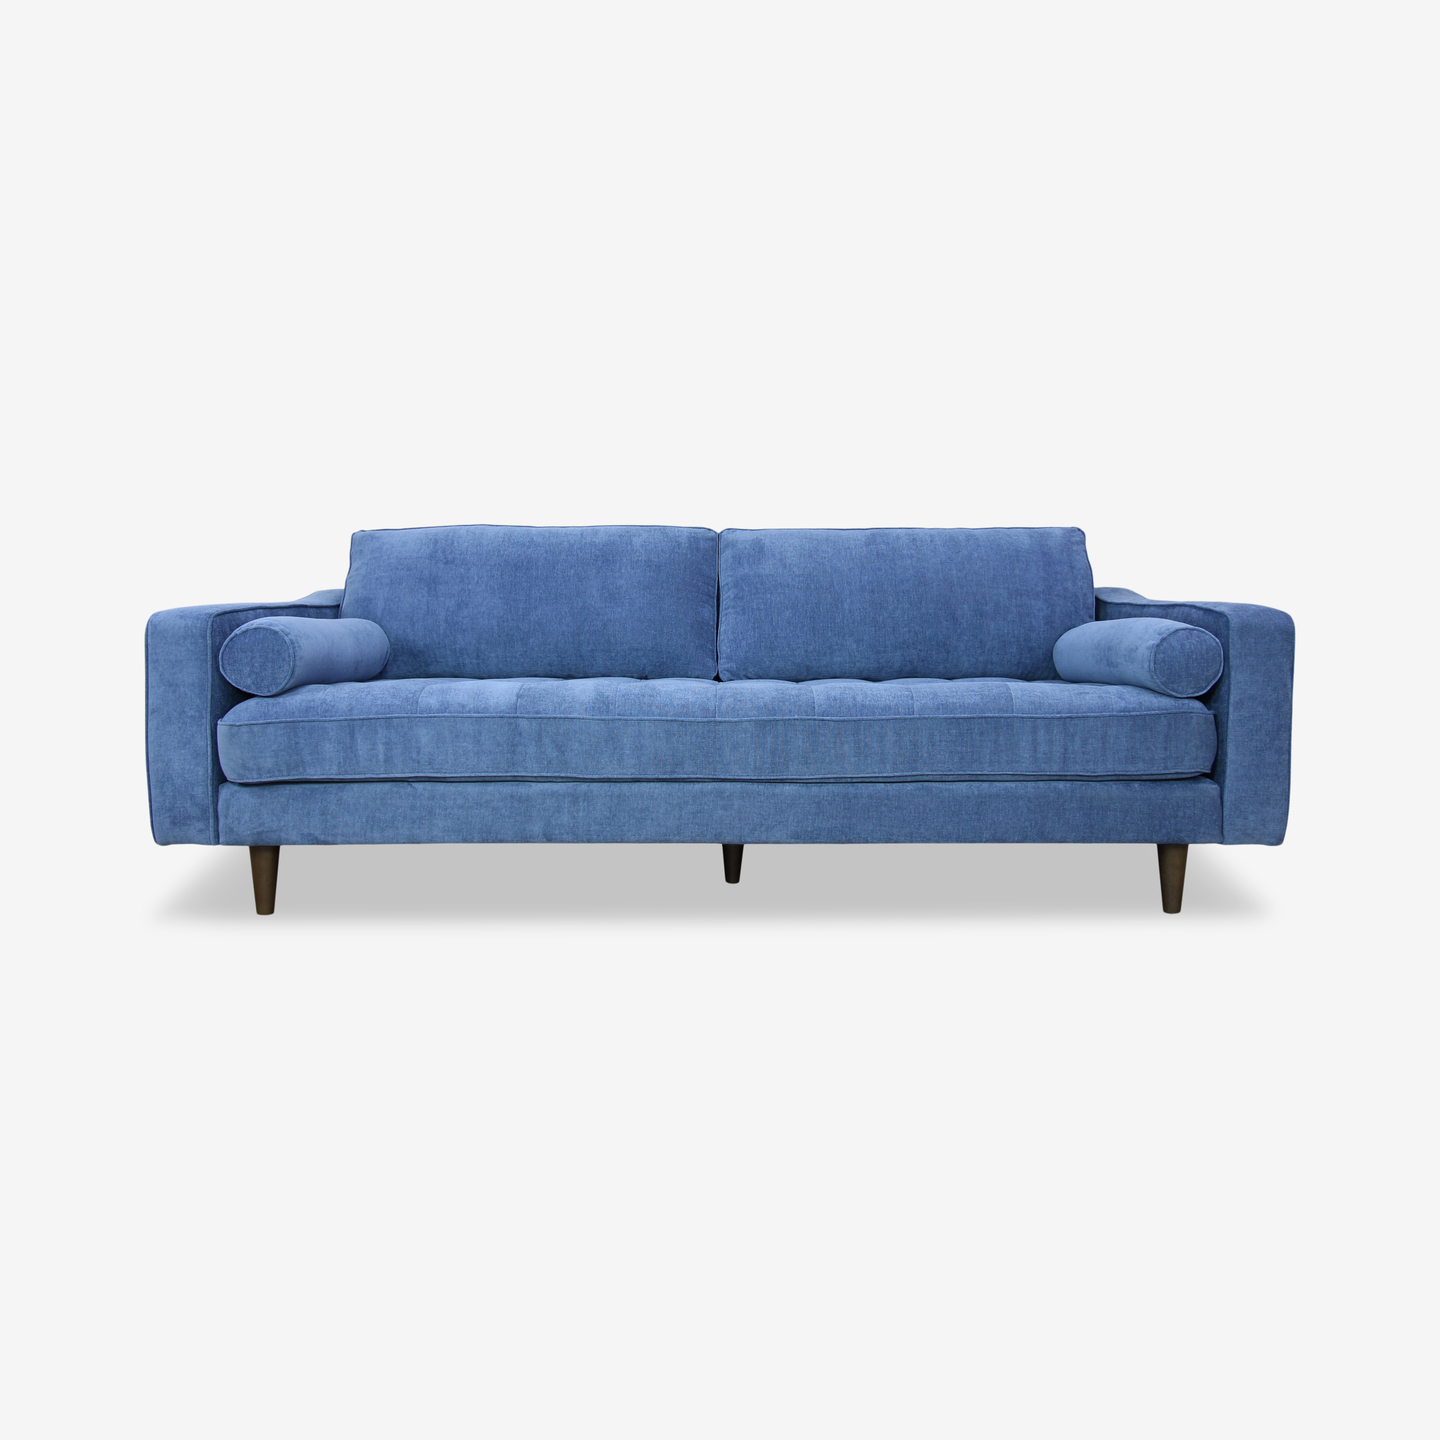 1182_Martell-Sofa-Blue_front_2020